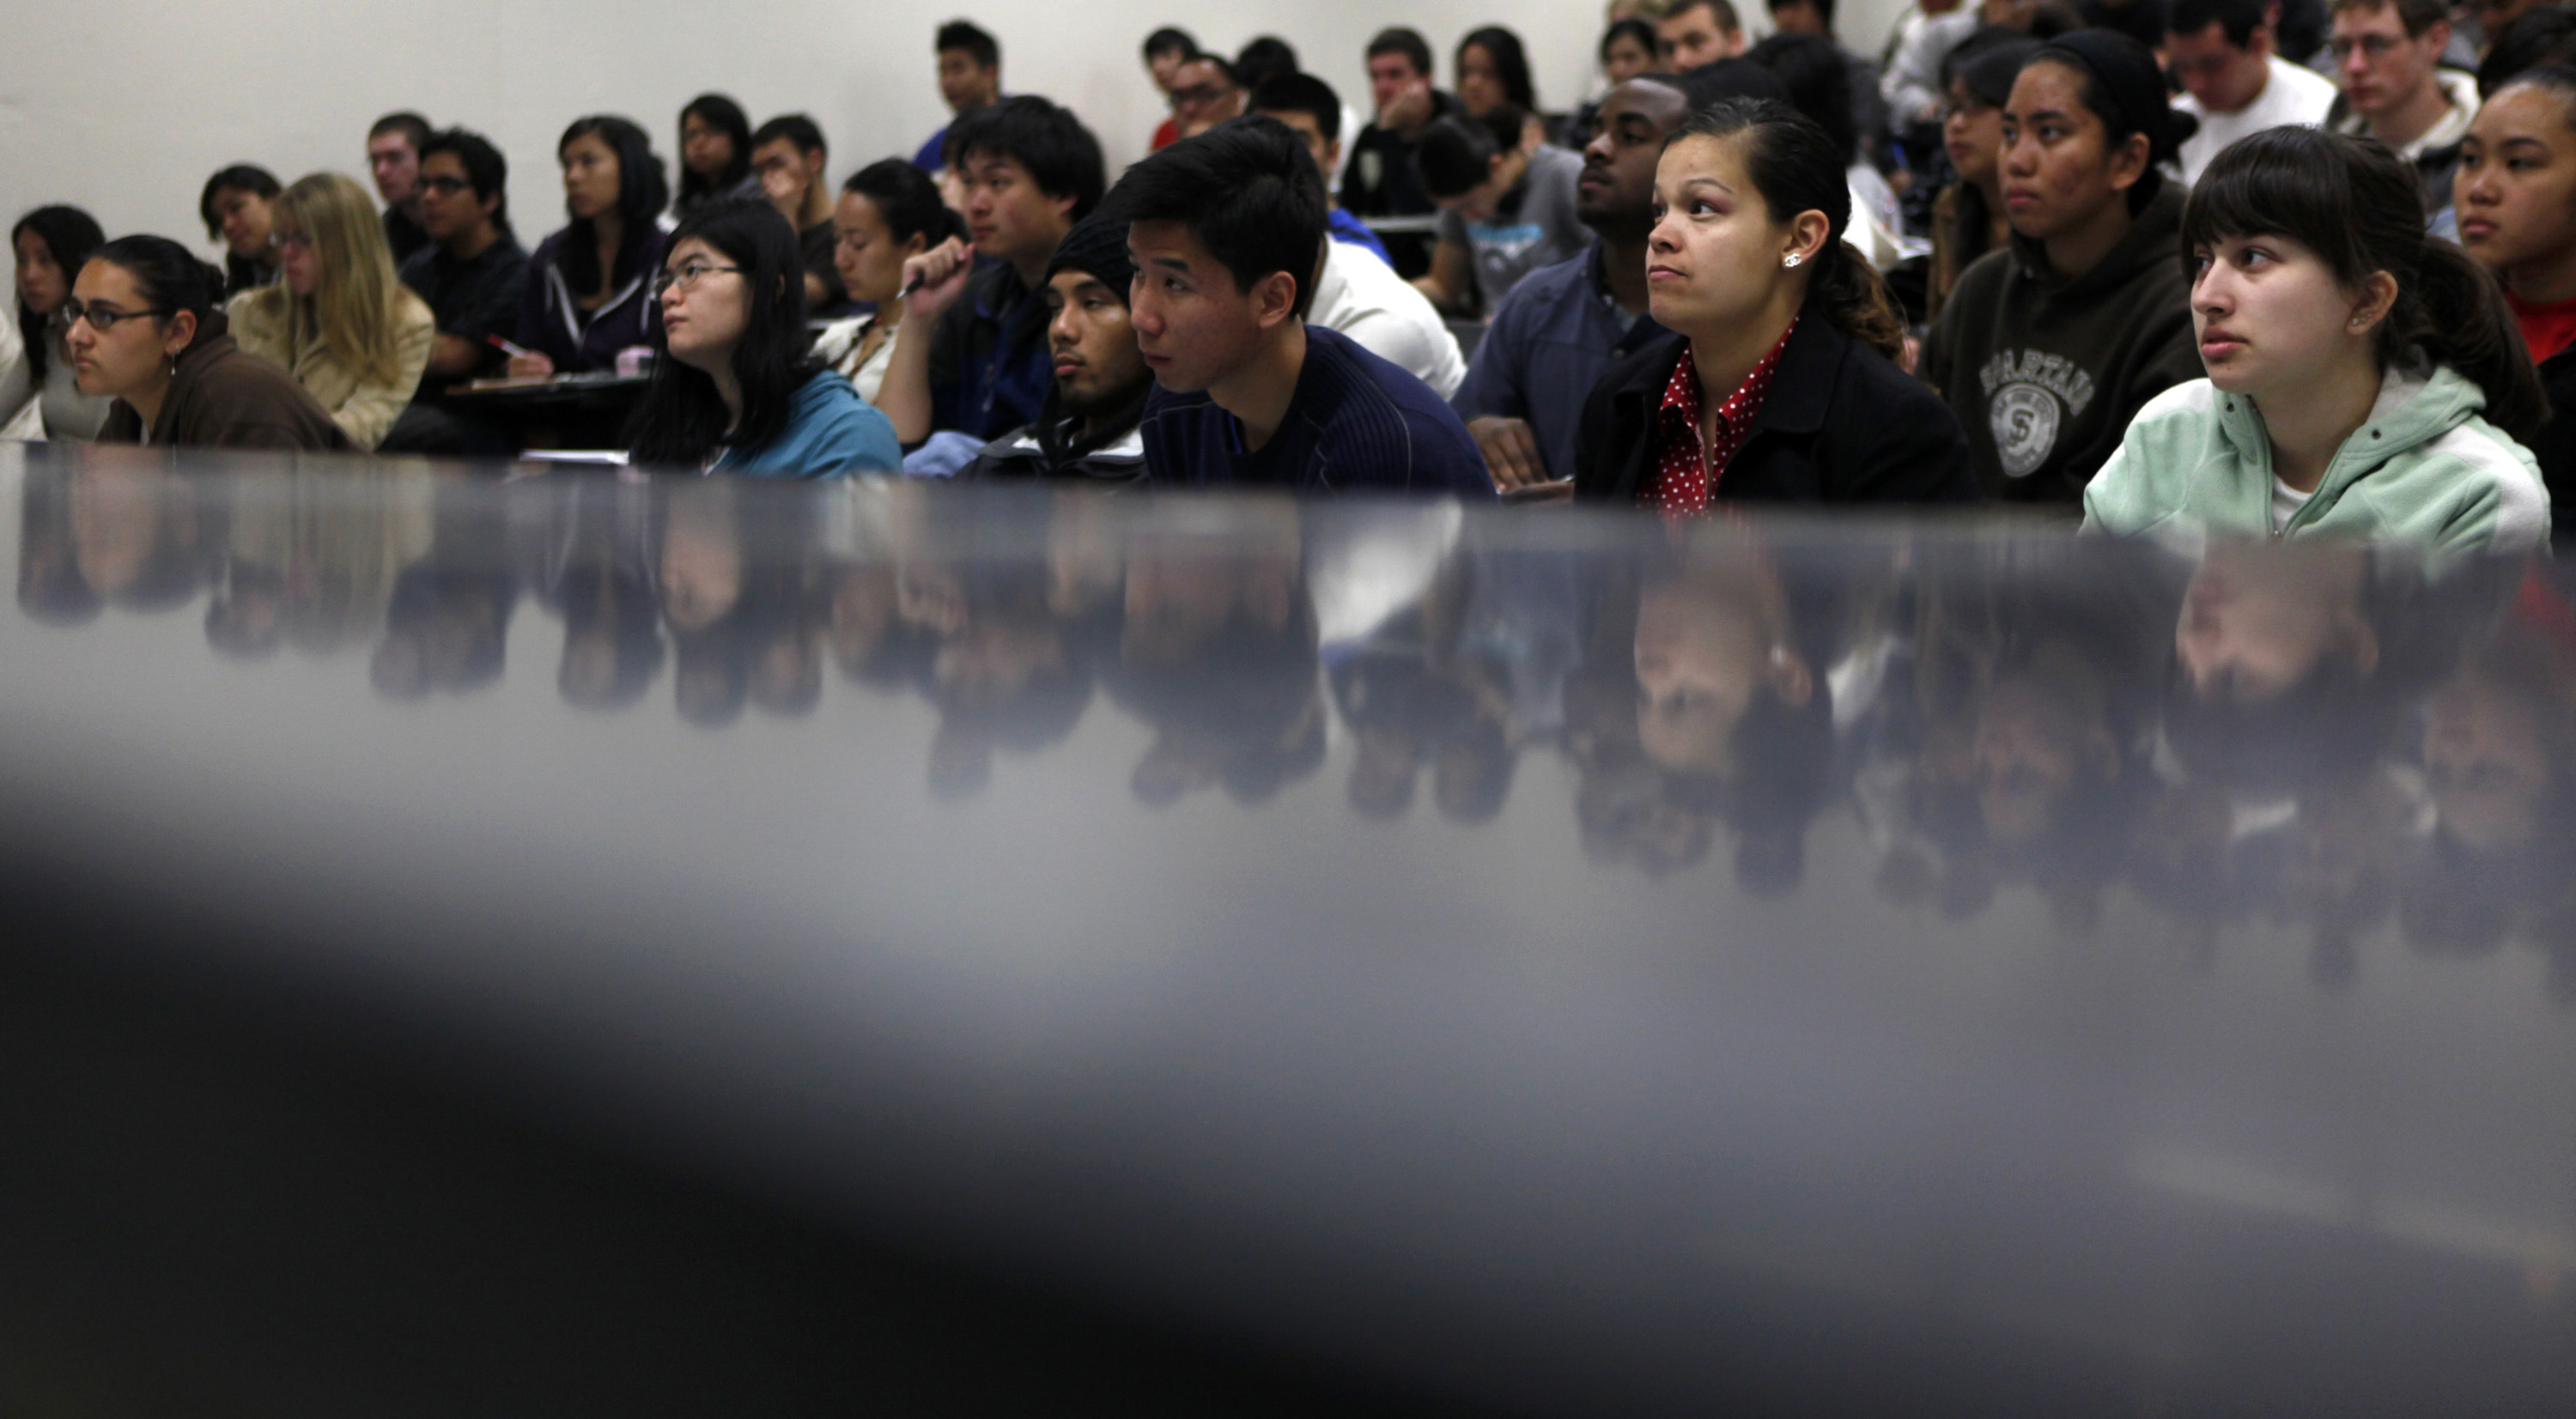 Many students sit and listen to a lecture in a lecture hall.